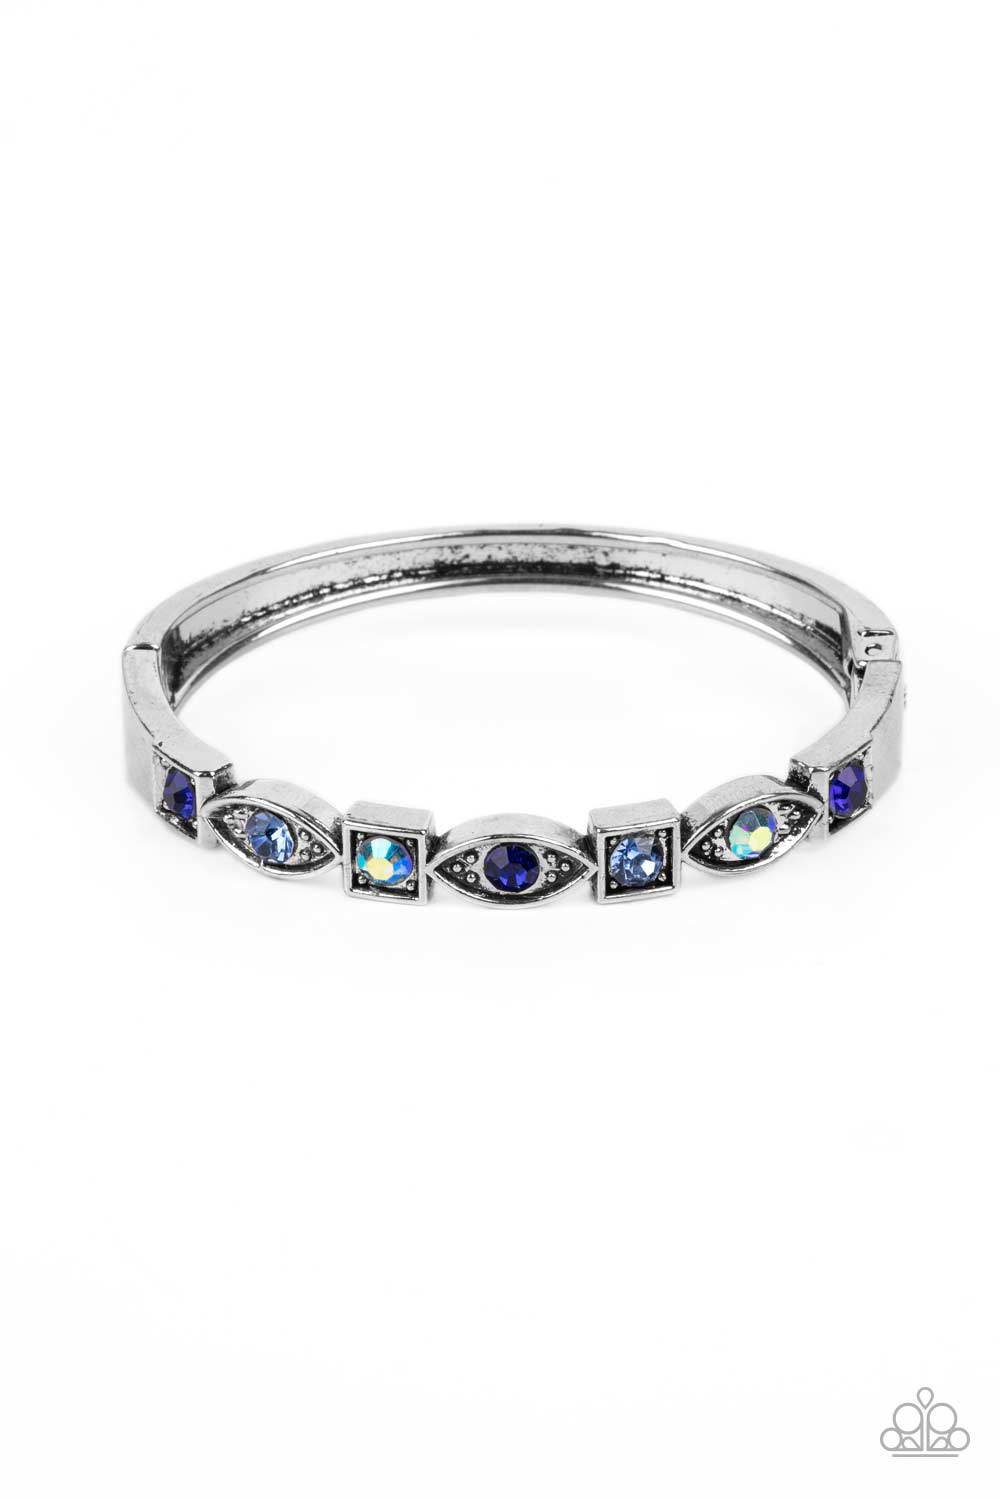 Poetically Picturesque Bracelet (Blue, Brown)